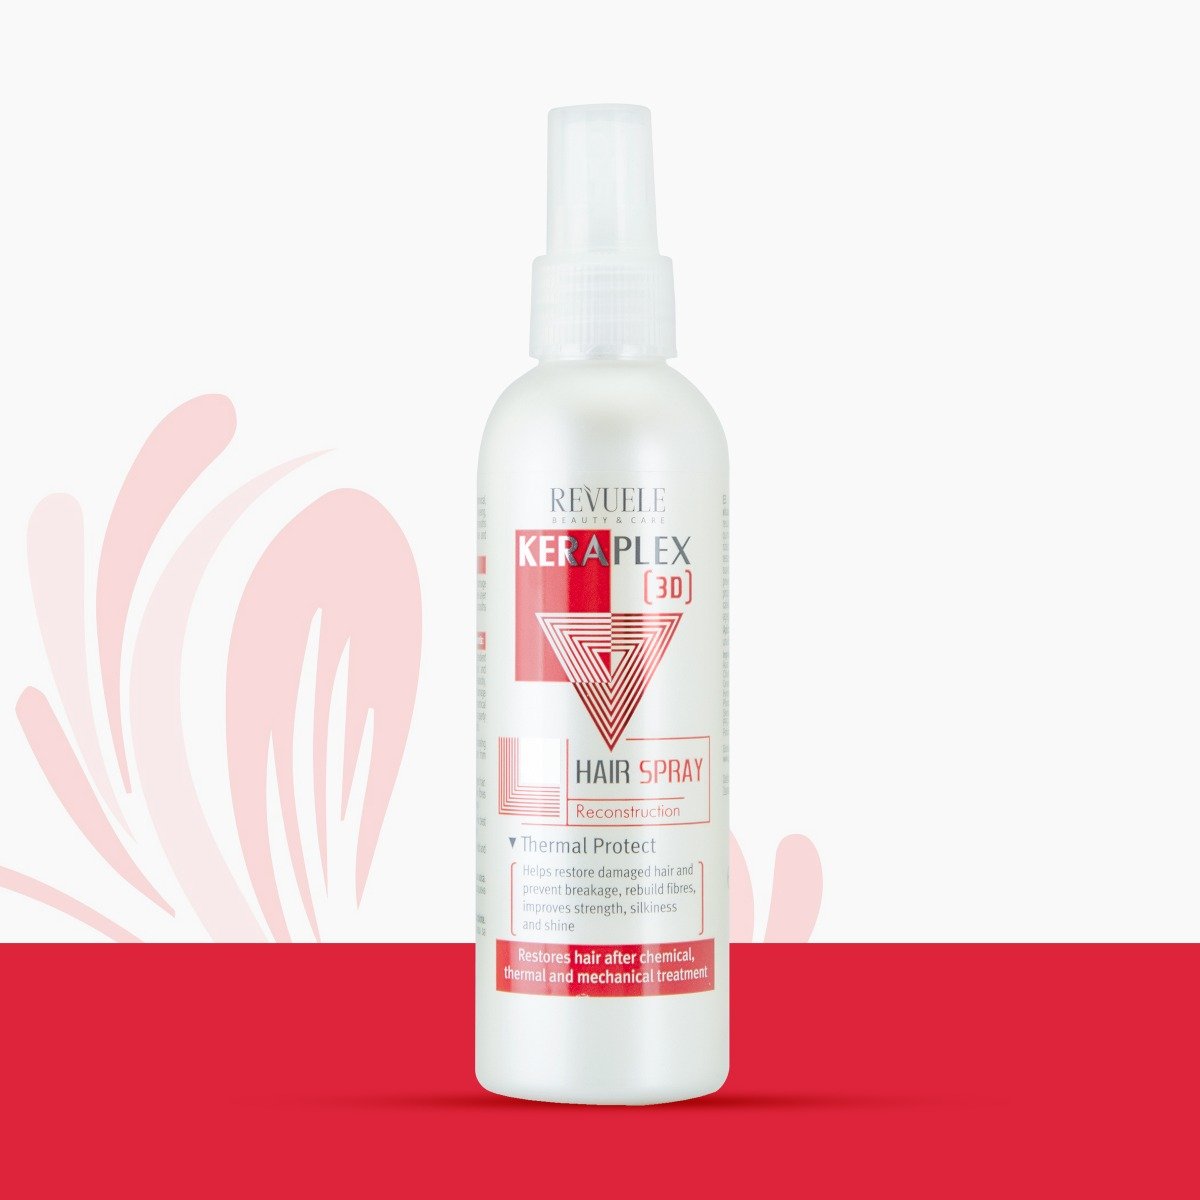 Revuele Keraplex Reconstructing and Thermal Protect Hair Spray